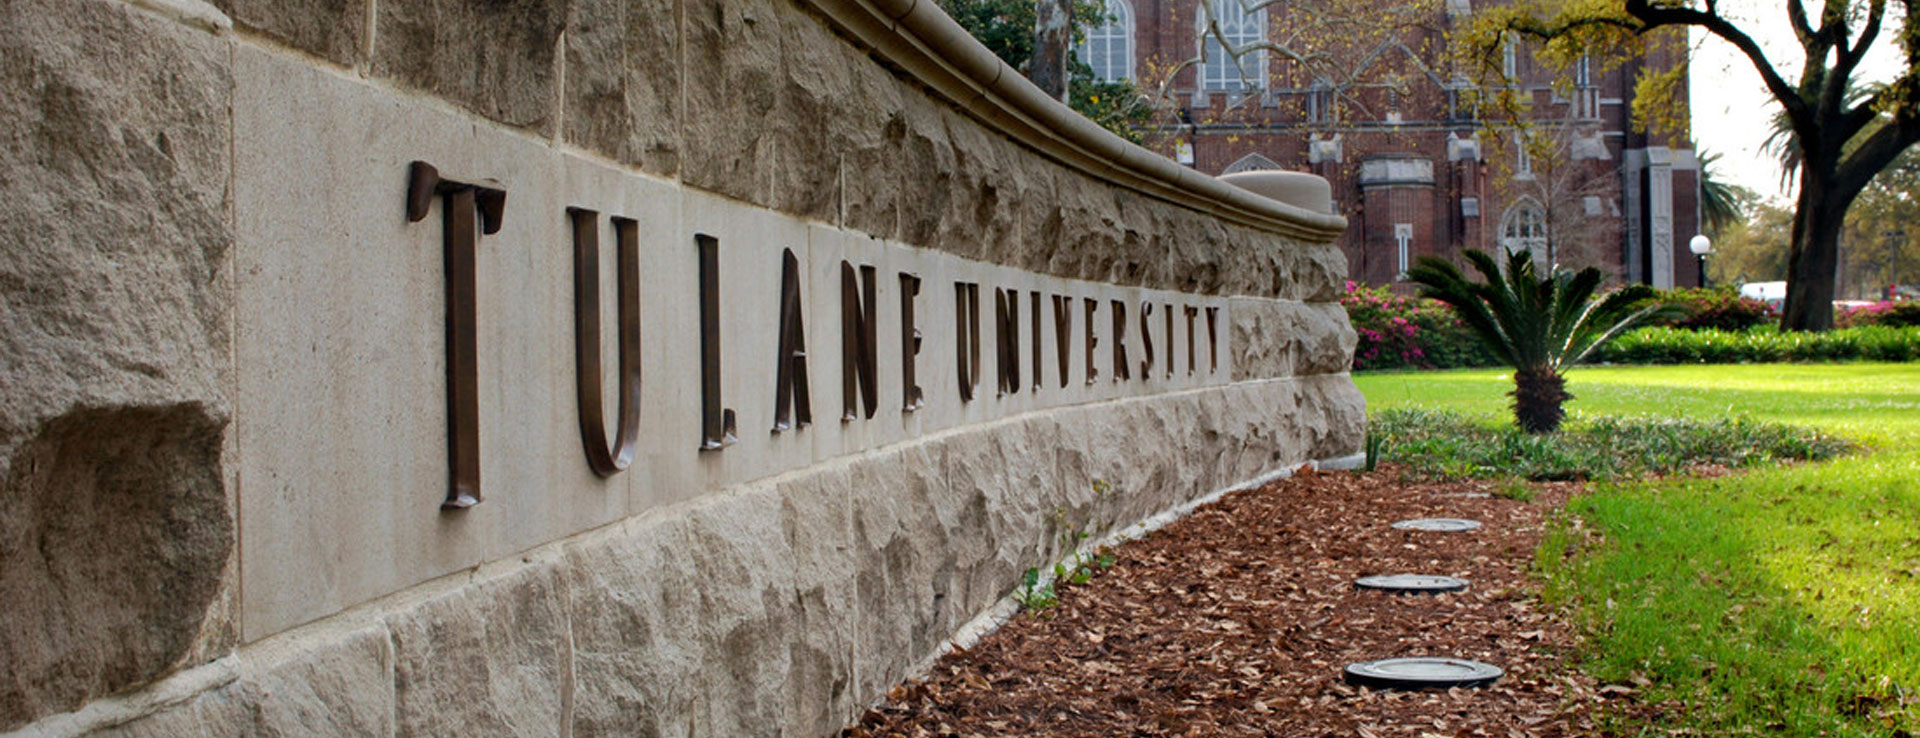 Tulane University signage in front of Gibson Hall